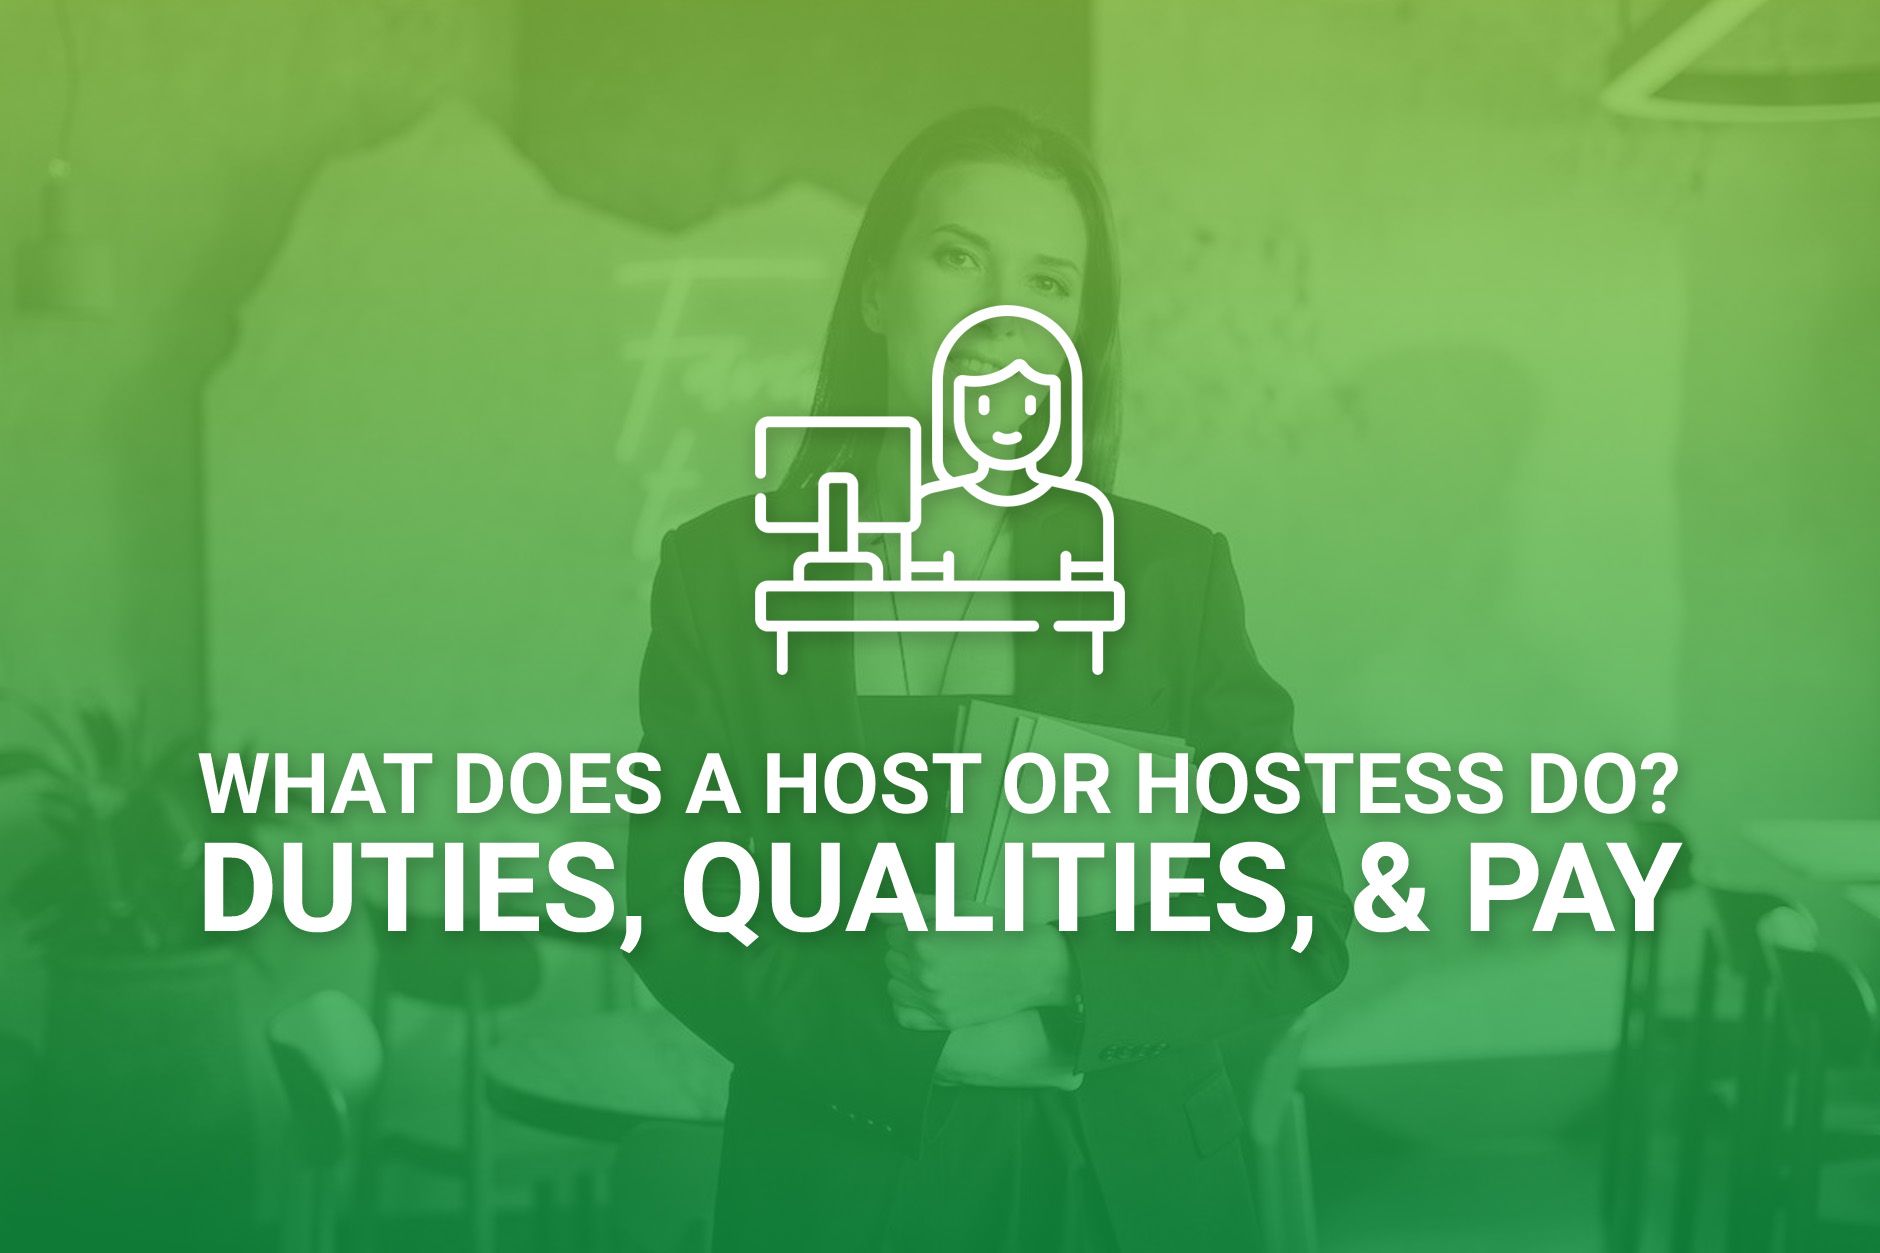 What Does A Host Or Hostess Do?